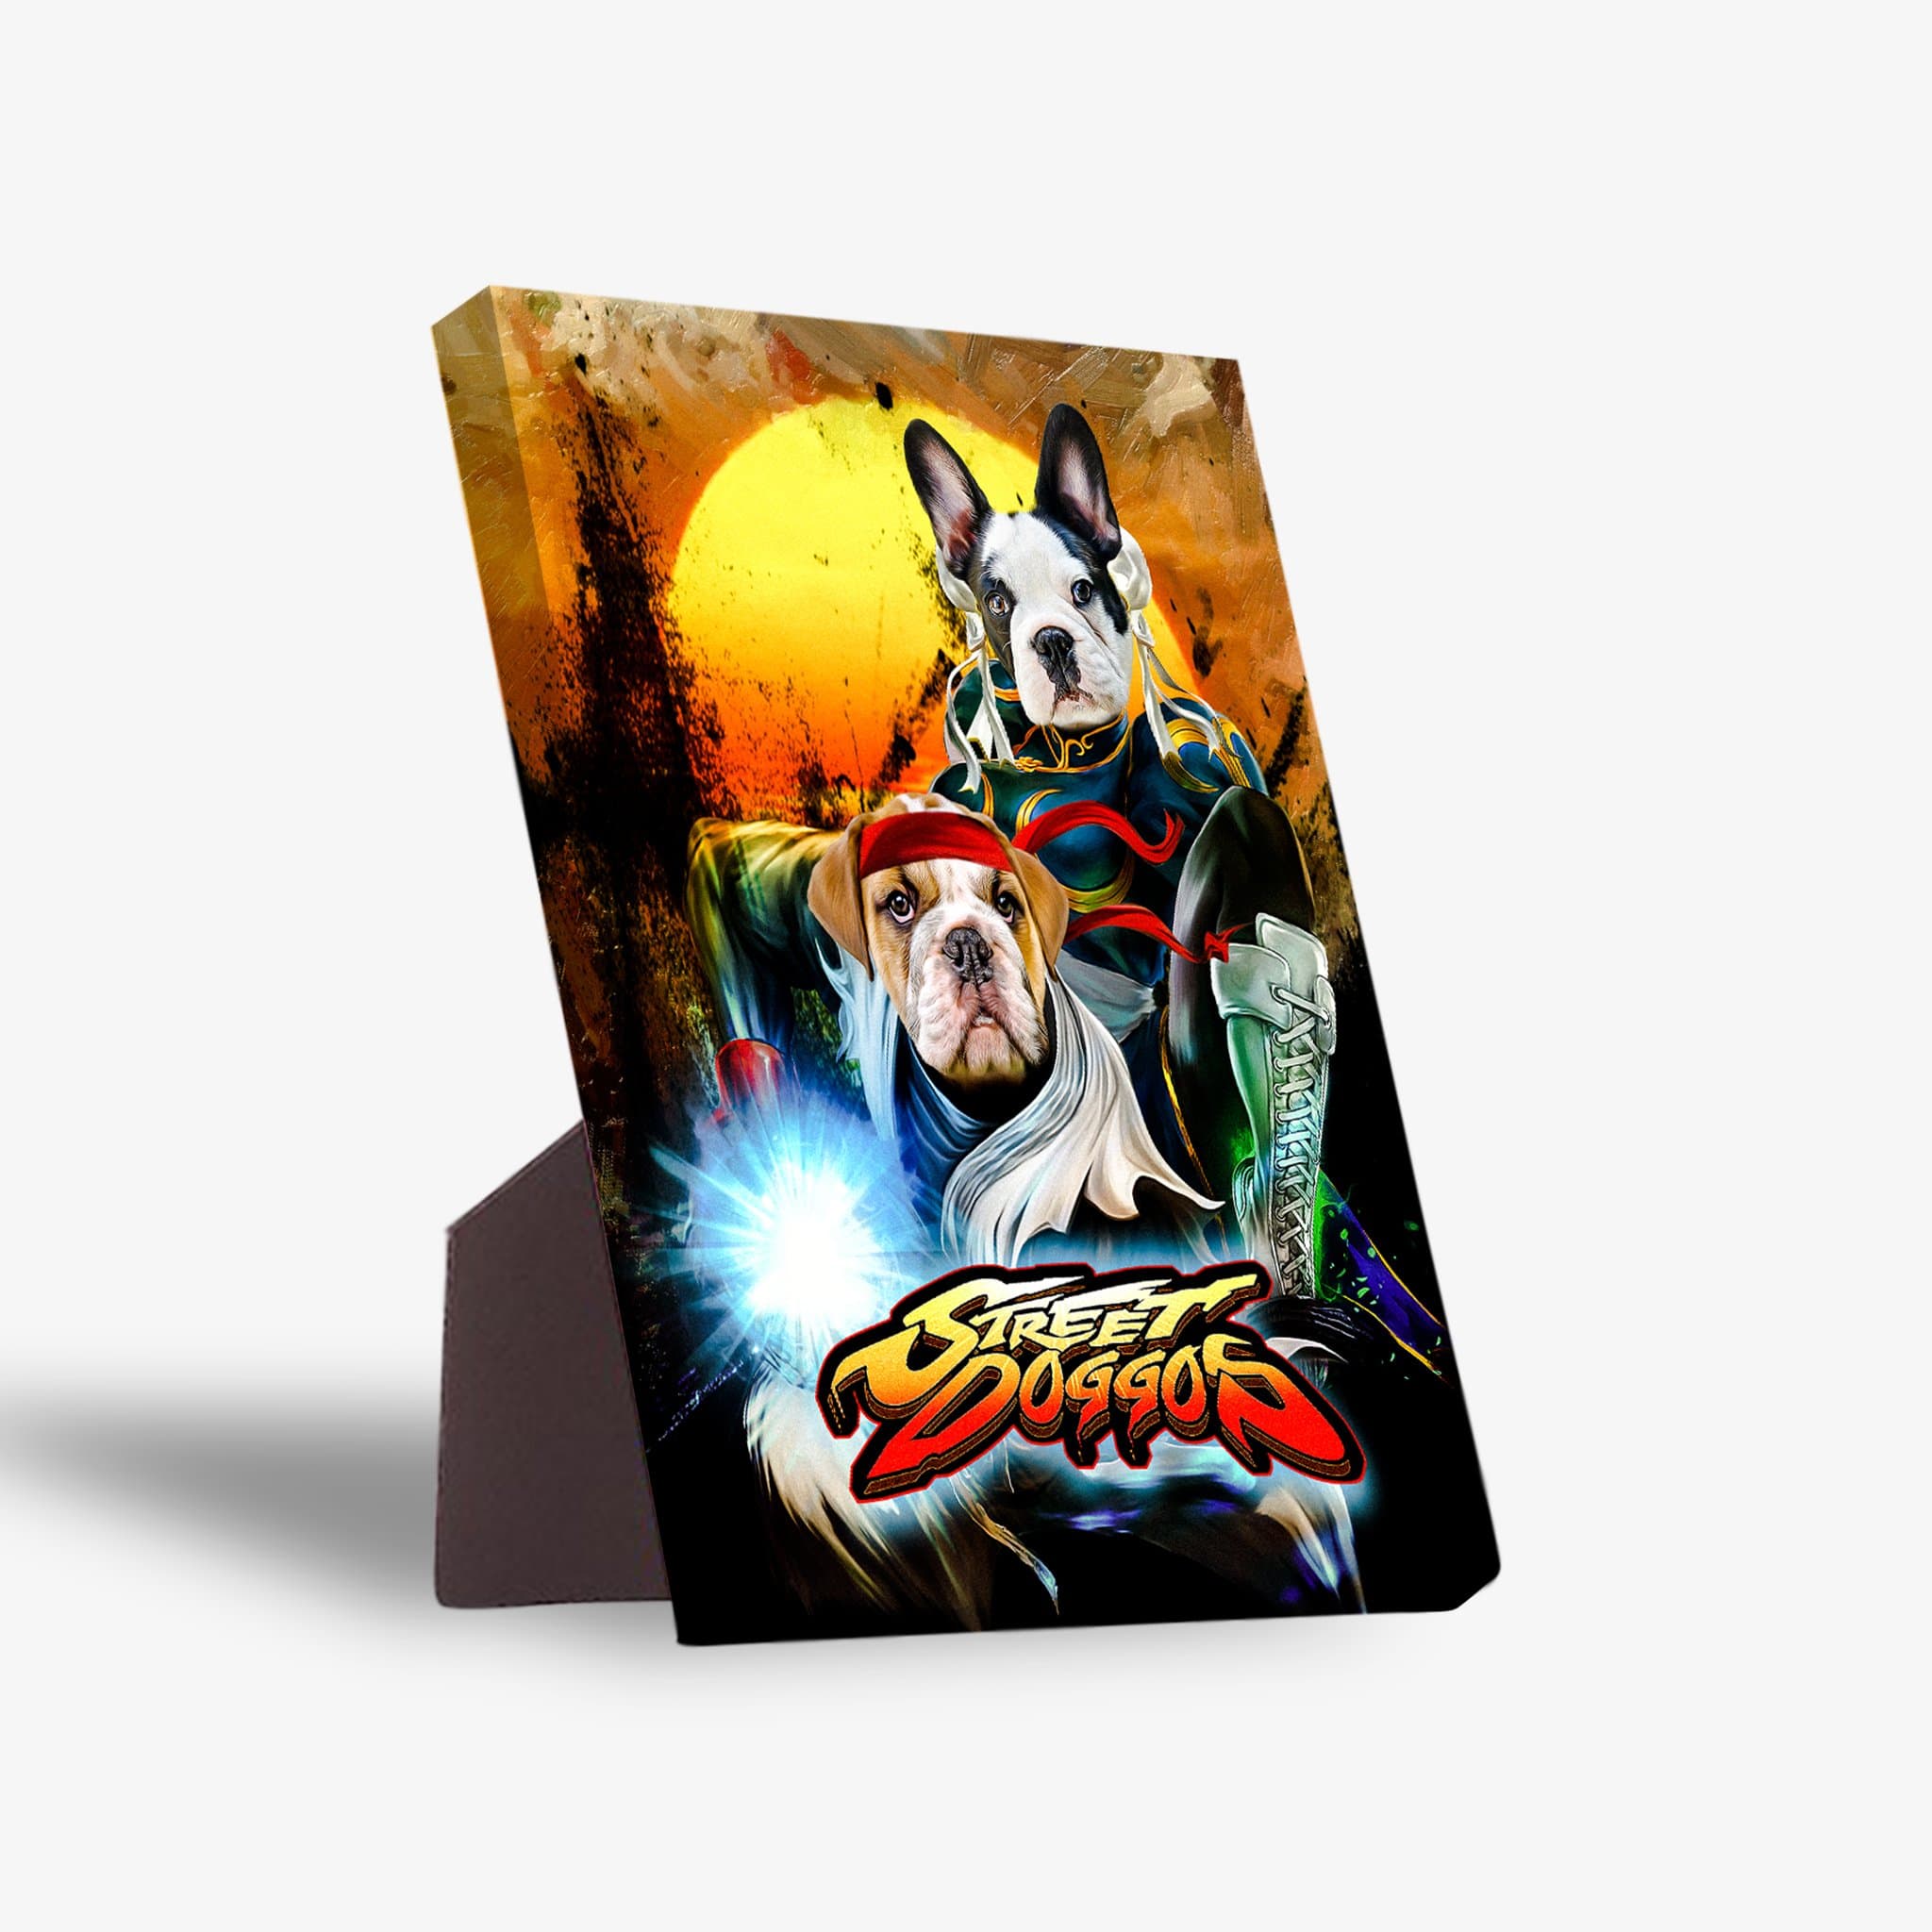 &#39;Street Doggos 2&#39; Personalized 2 Pet Standing Canvas